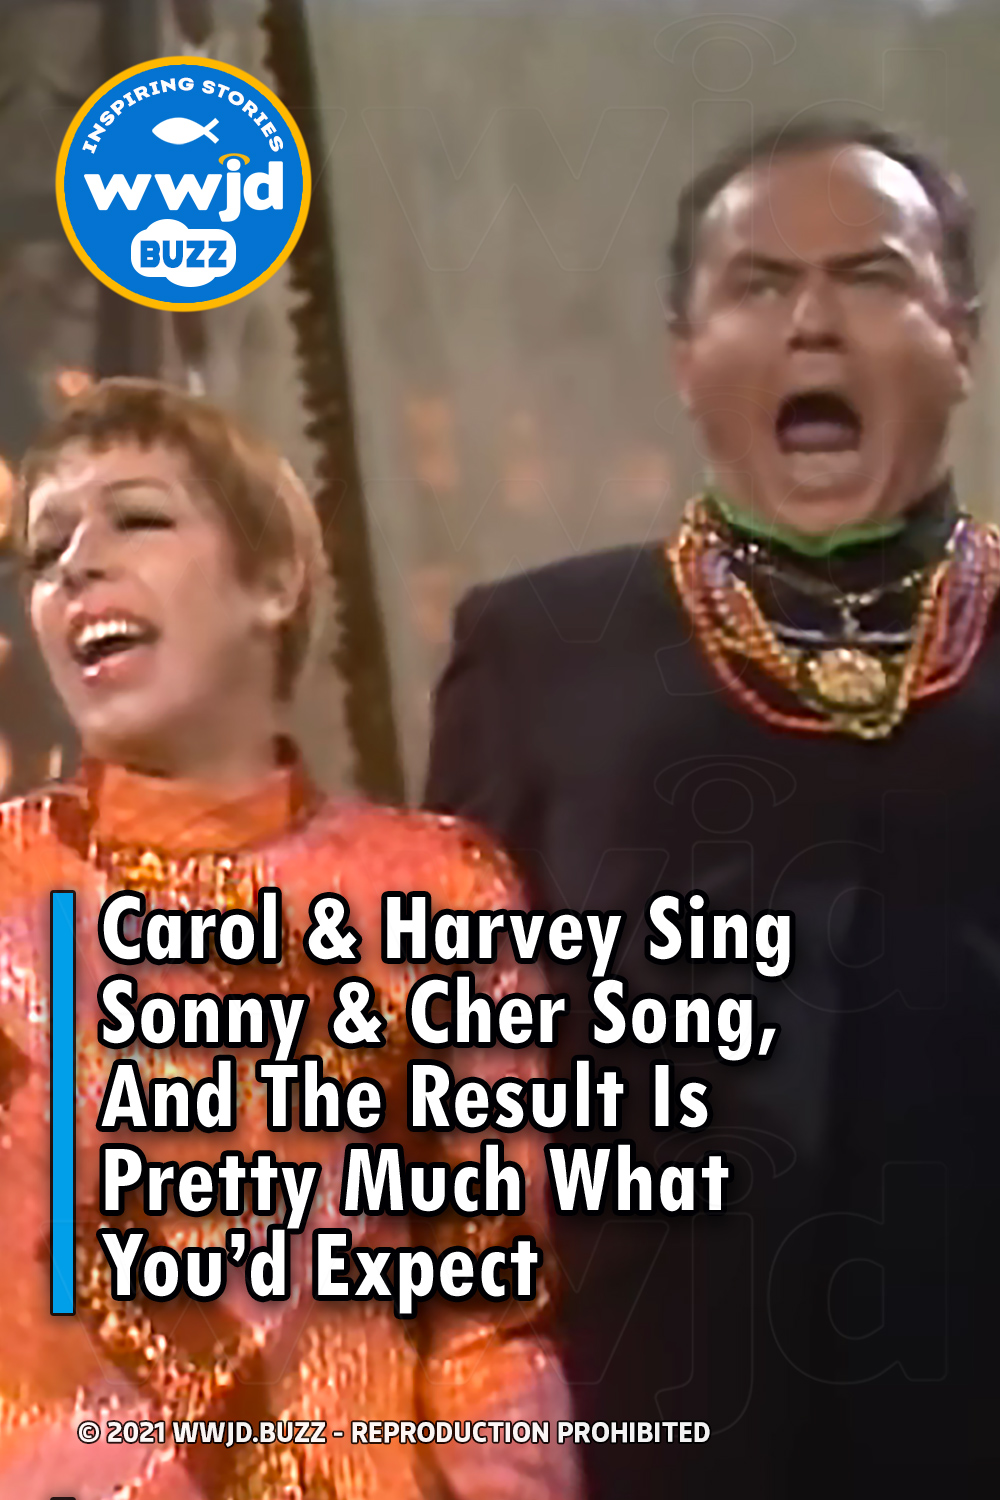 Carol & Harvey Sing Sonny & Cher Song, And The Result Is Pretty Much What You’d Expect